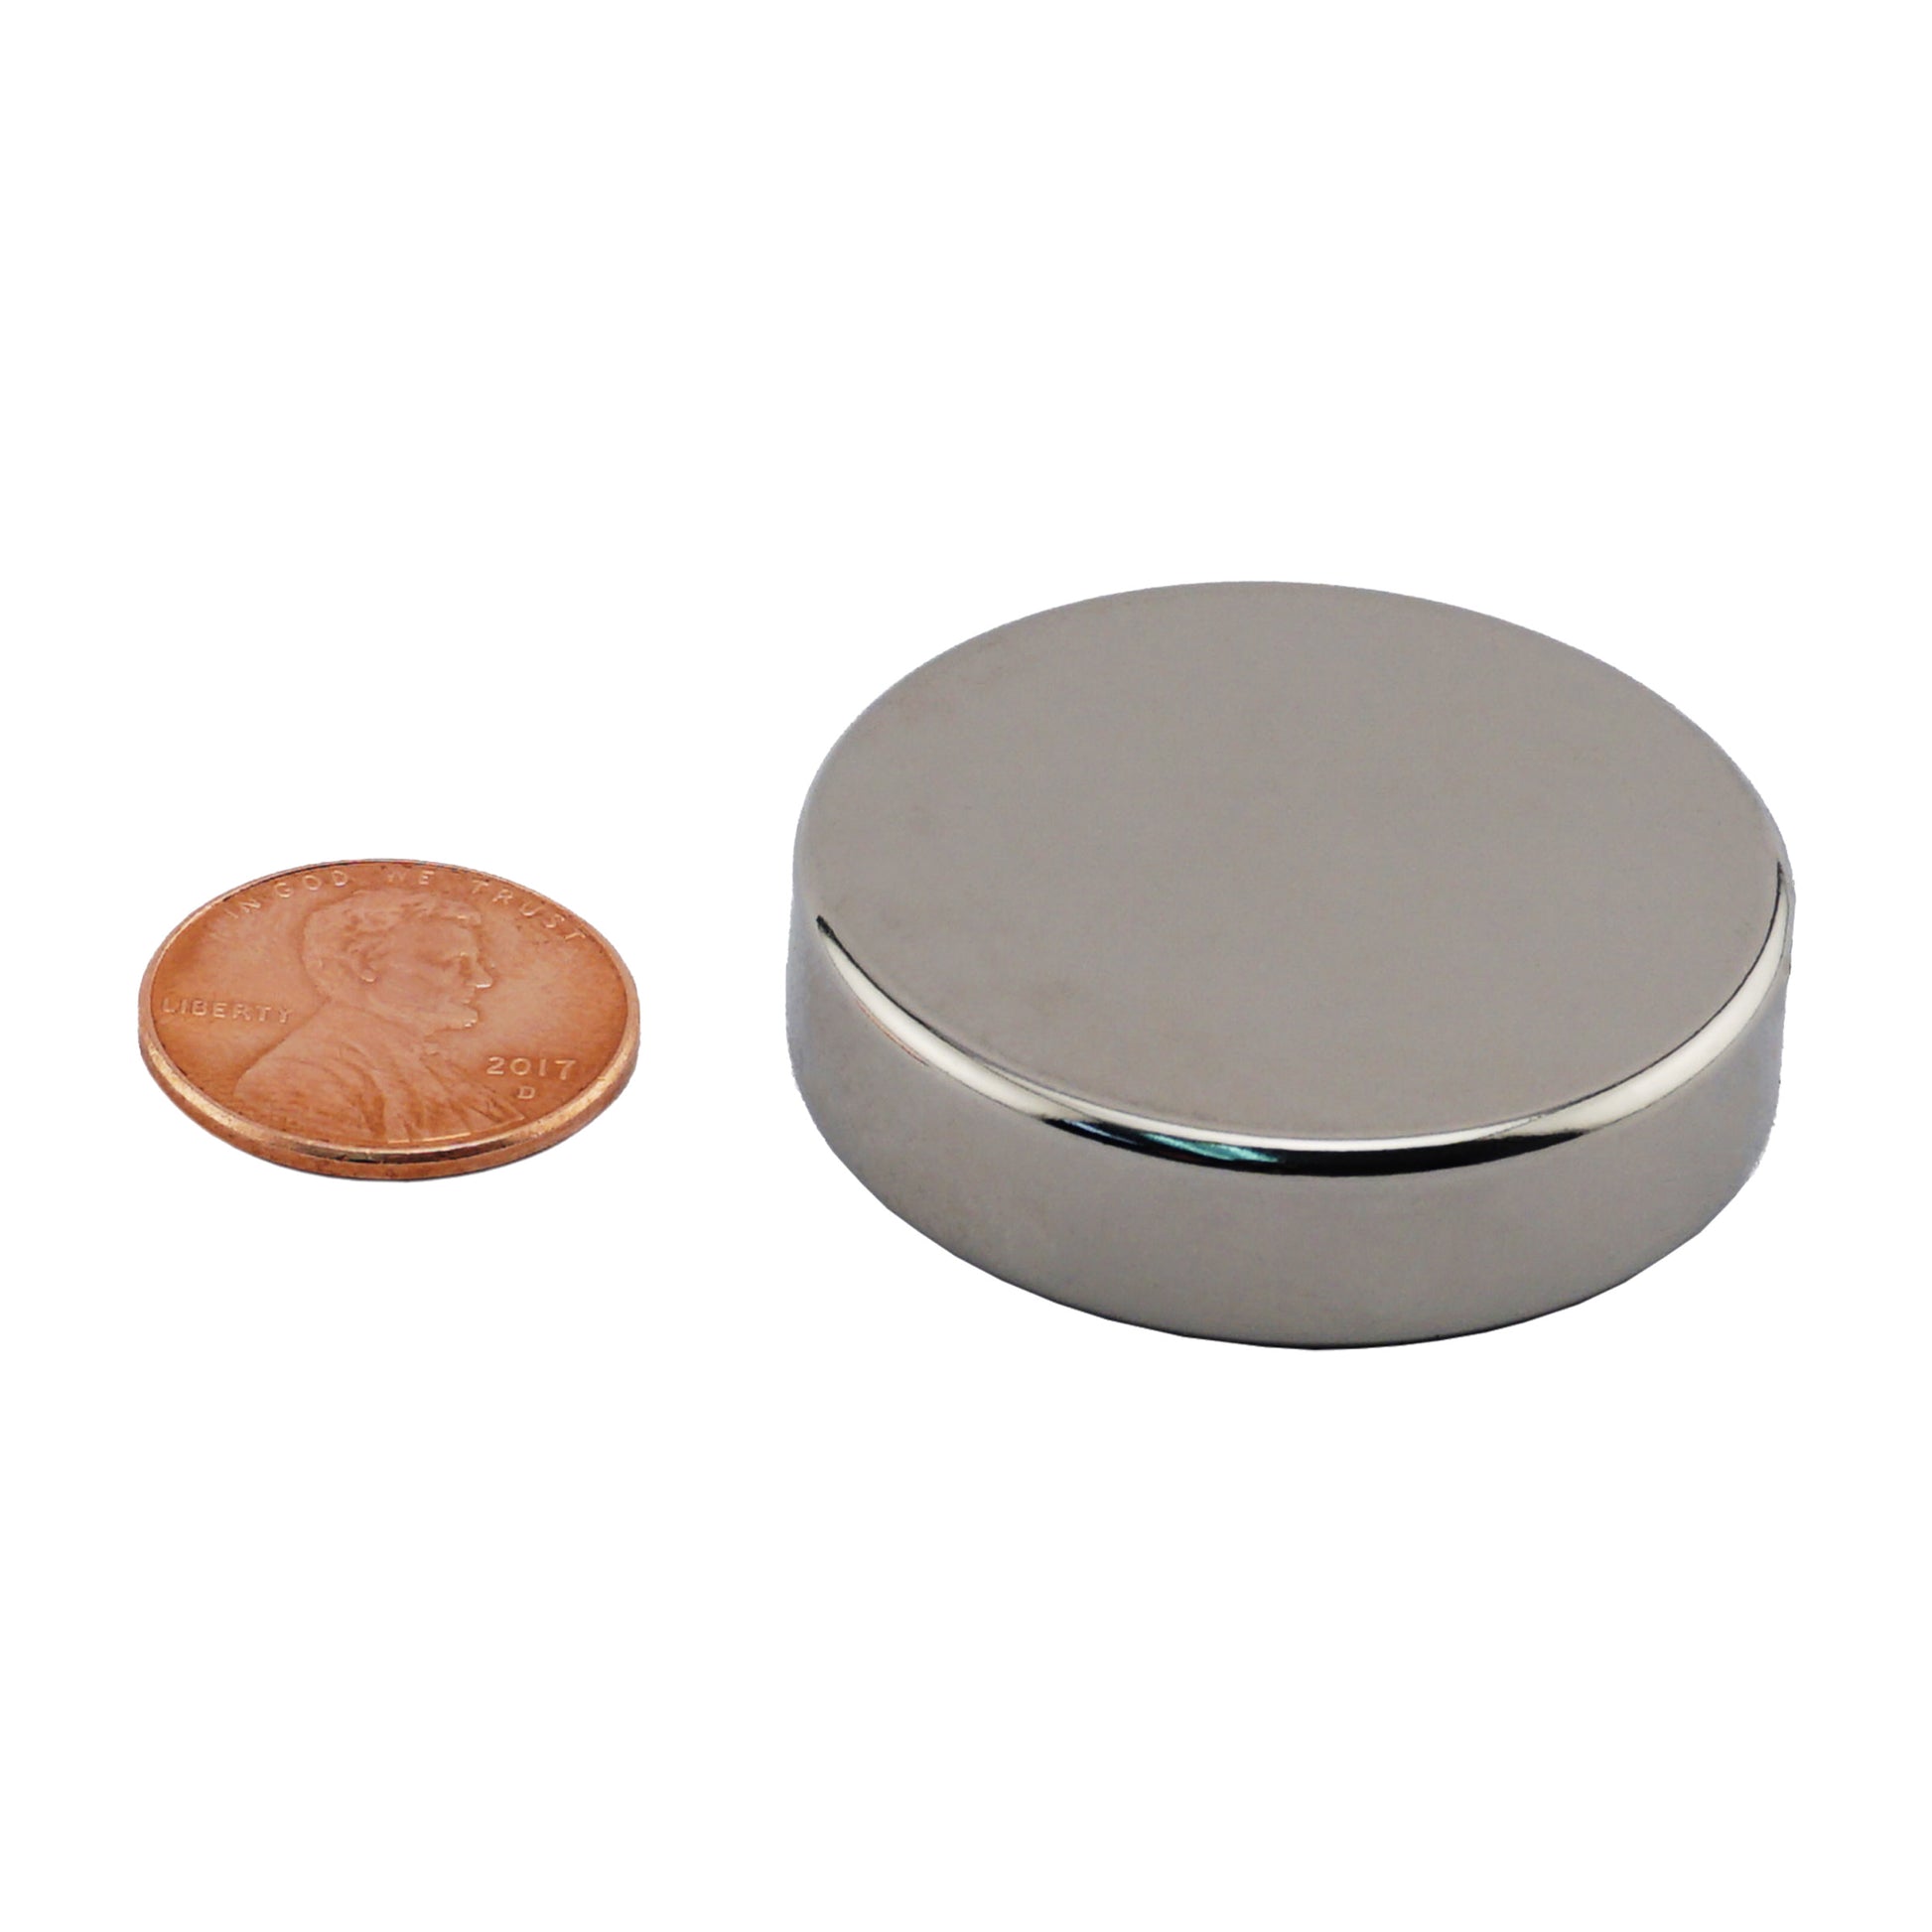 Load image into Gallery viewer, ND45-1.5X37N Neodymium Disc Magnet - Compared to Penny for Size Reference